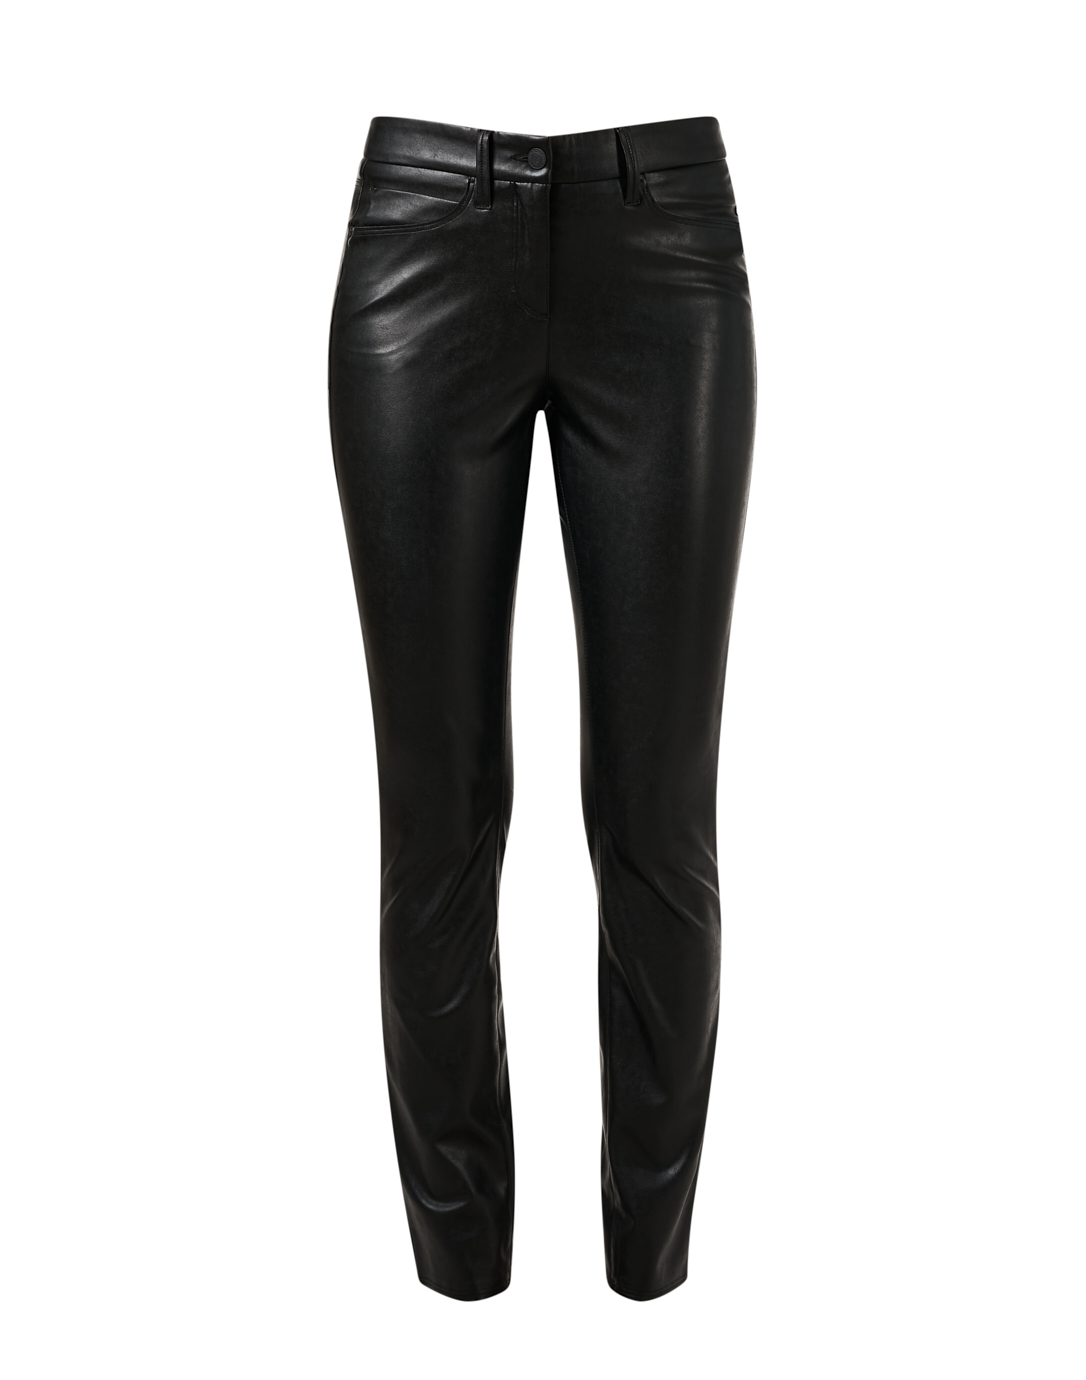 Hoxekle Vegan Leather Pants for Women High Waist Slim Breathable Soft  Skinny Stretch Black Fashion Party Trousers at  Women's Clothing store